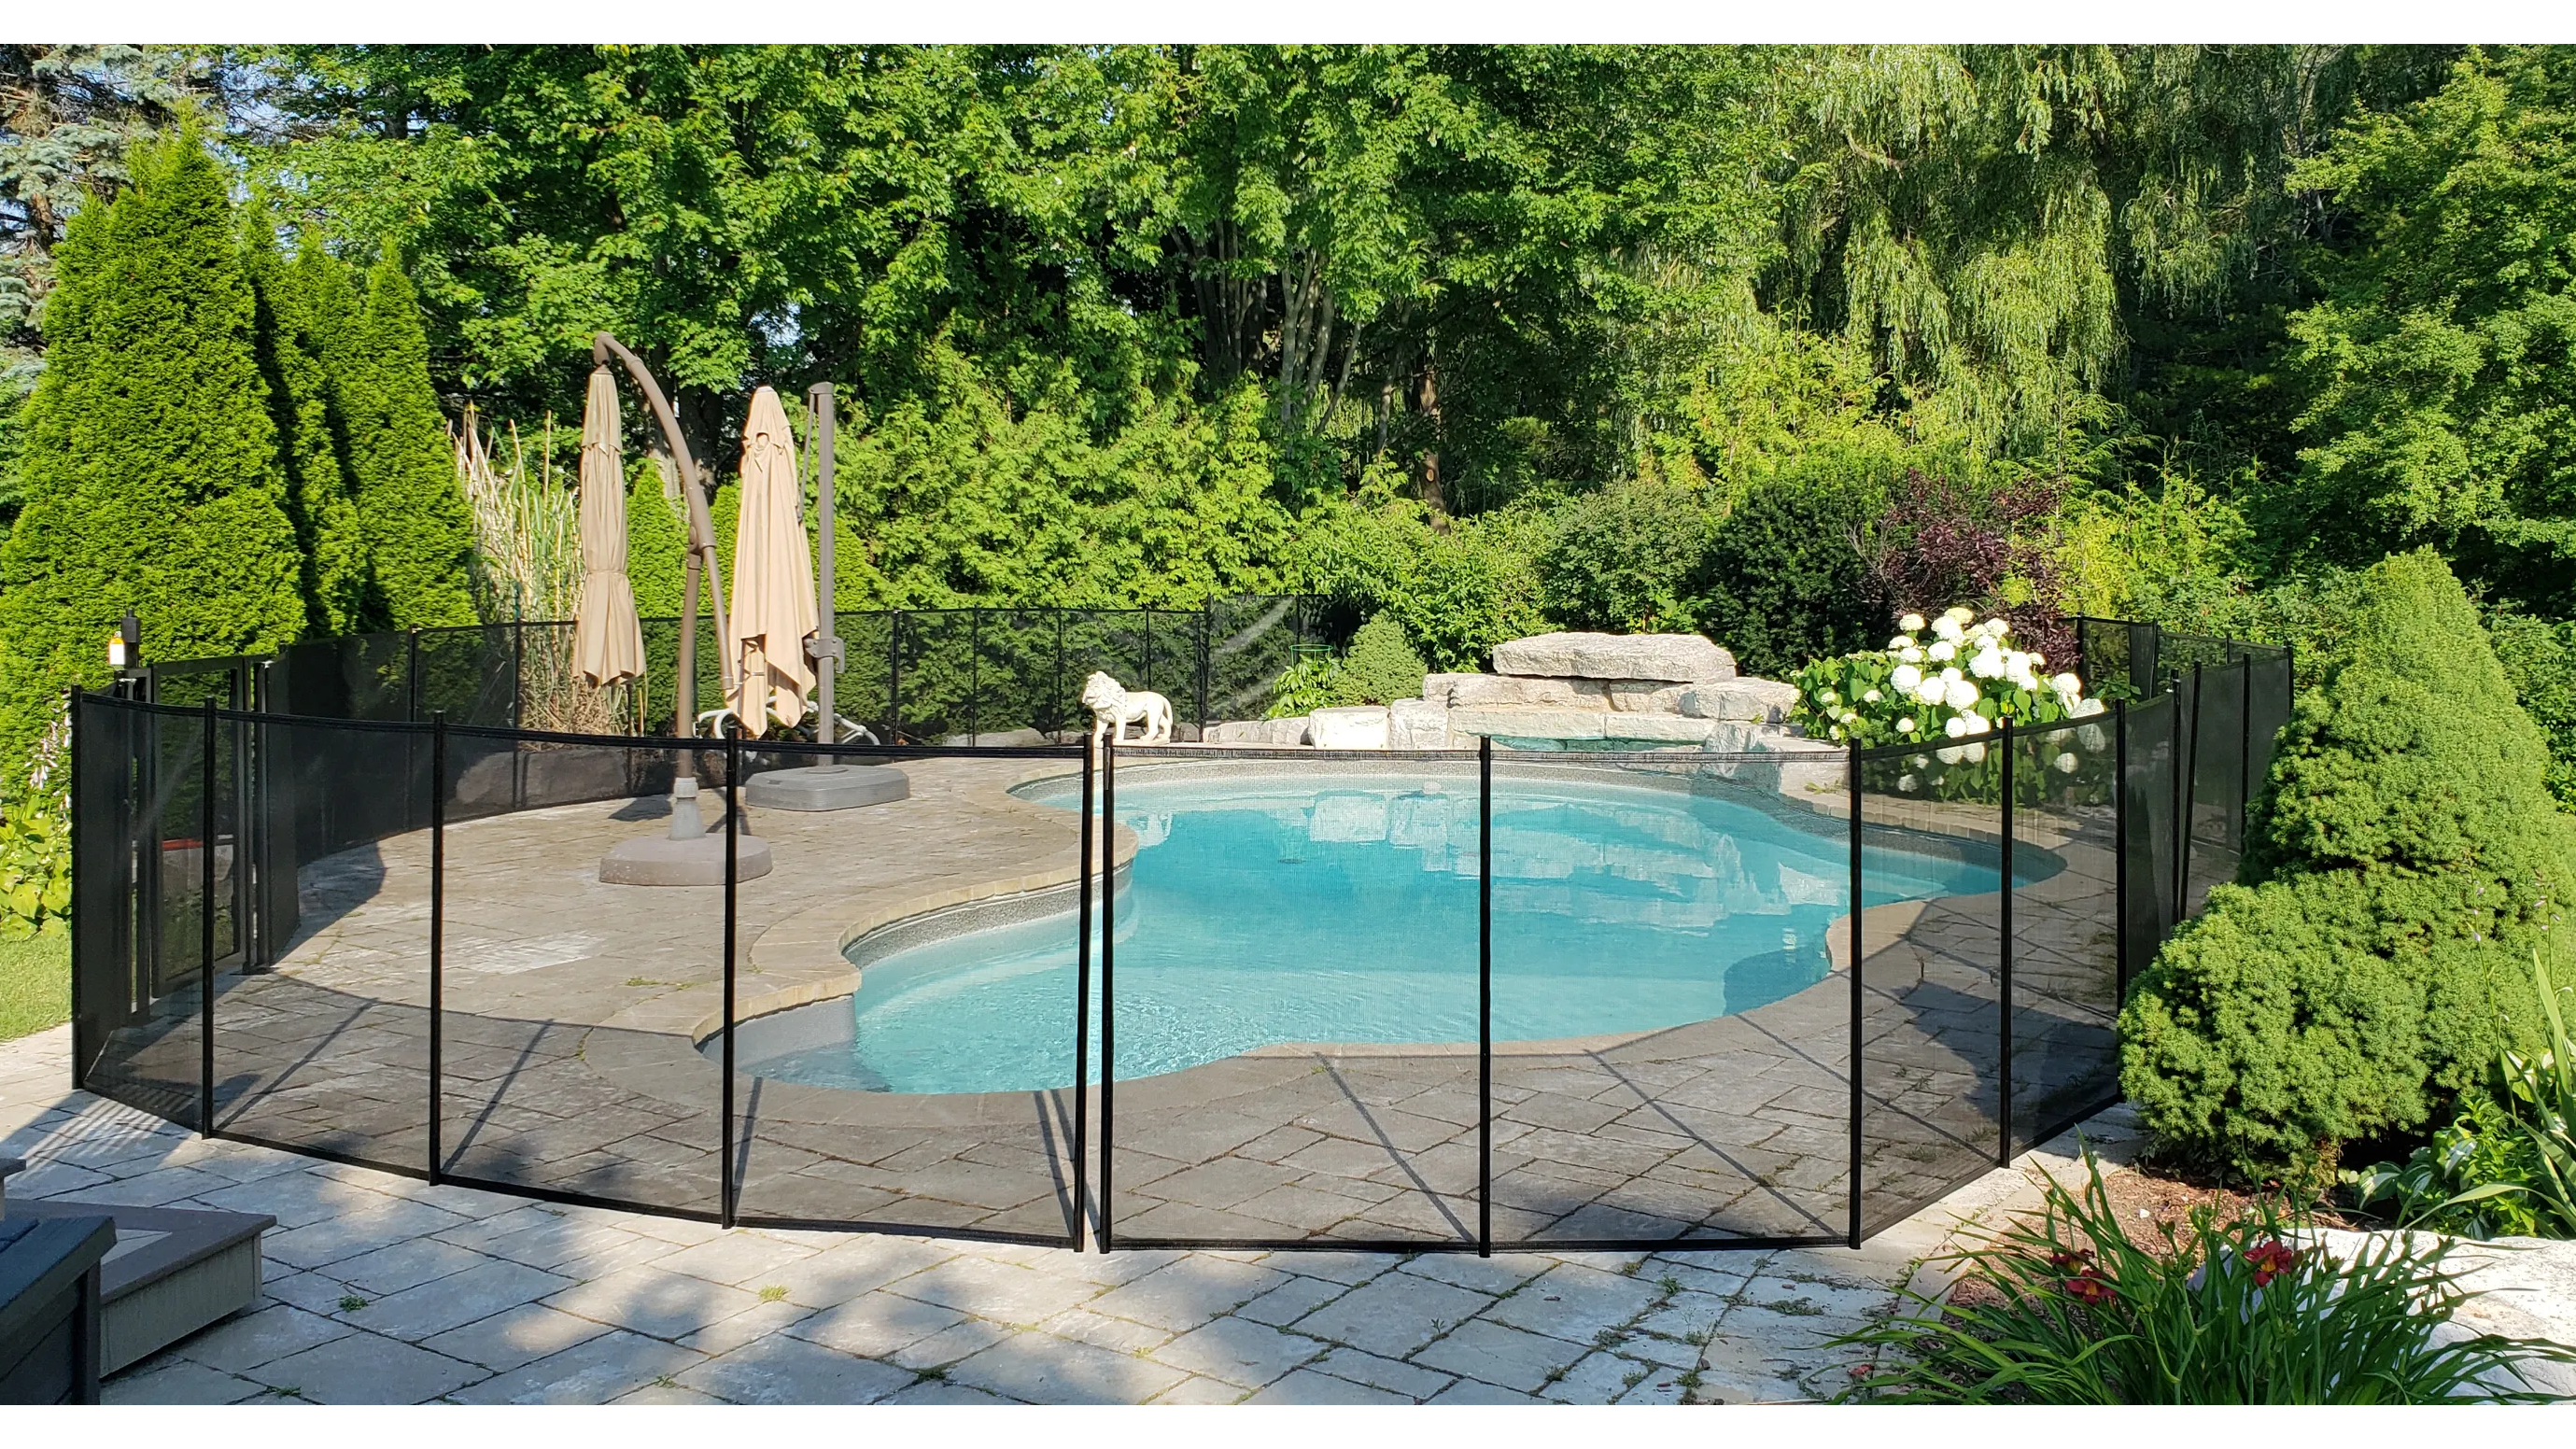 Baby Barrier pool fencing installed around a customers' pool.